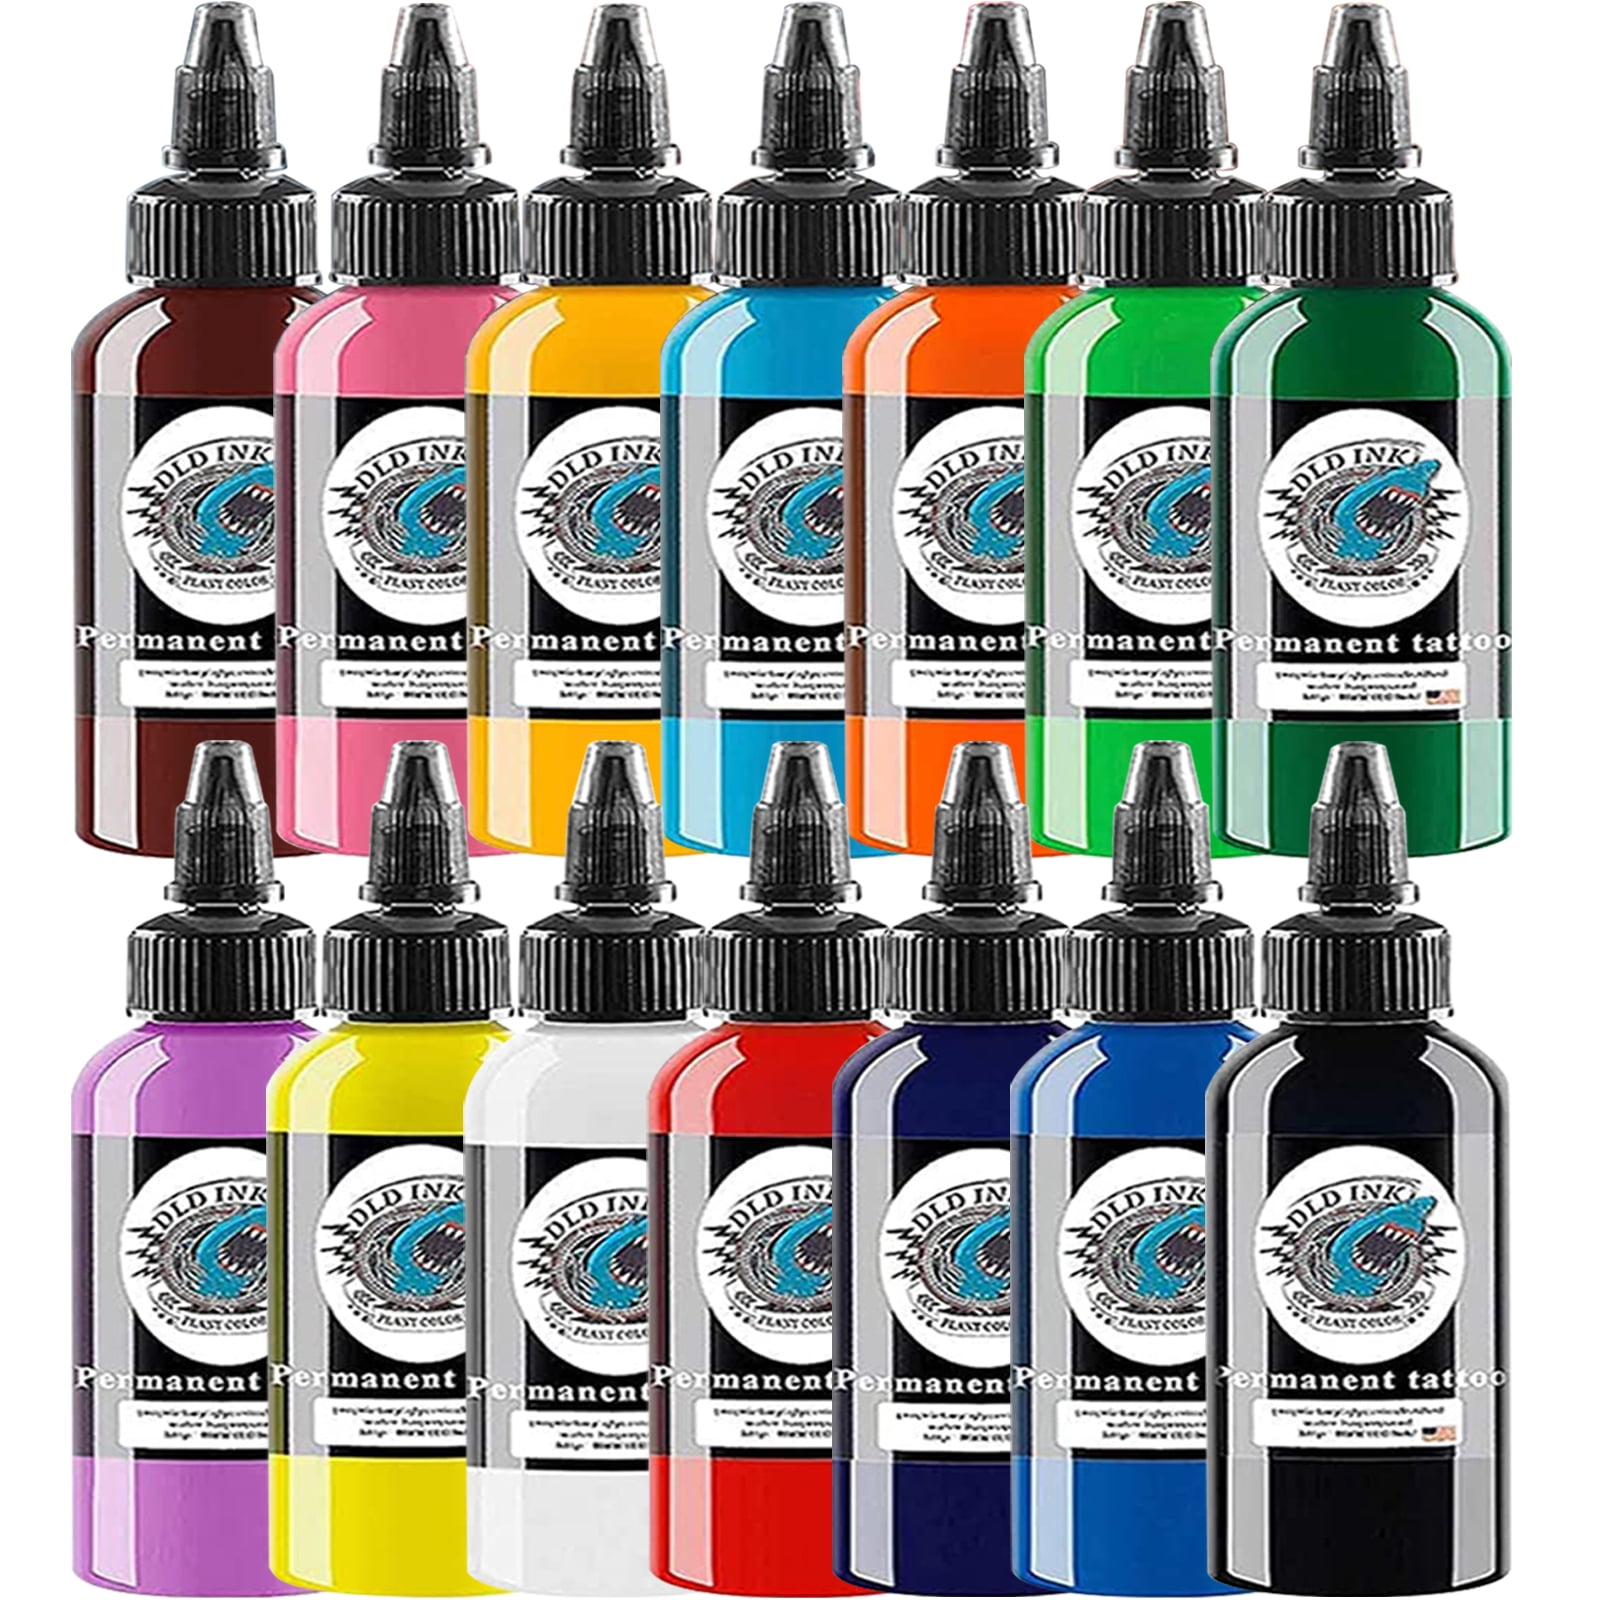 Tattoo Ink colors available in our stick and poke tattoo kits